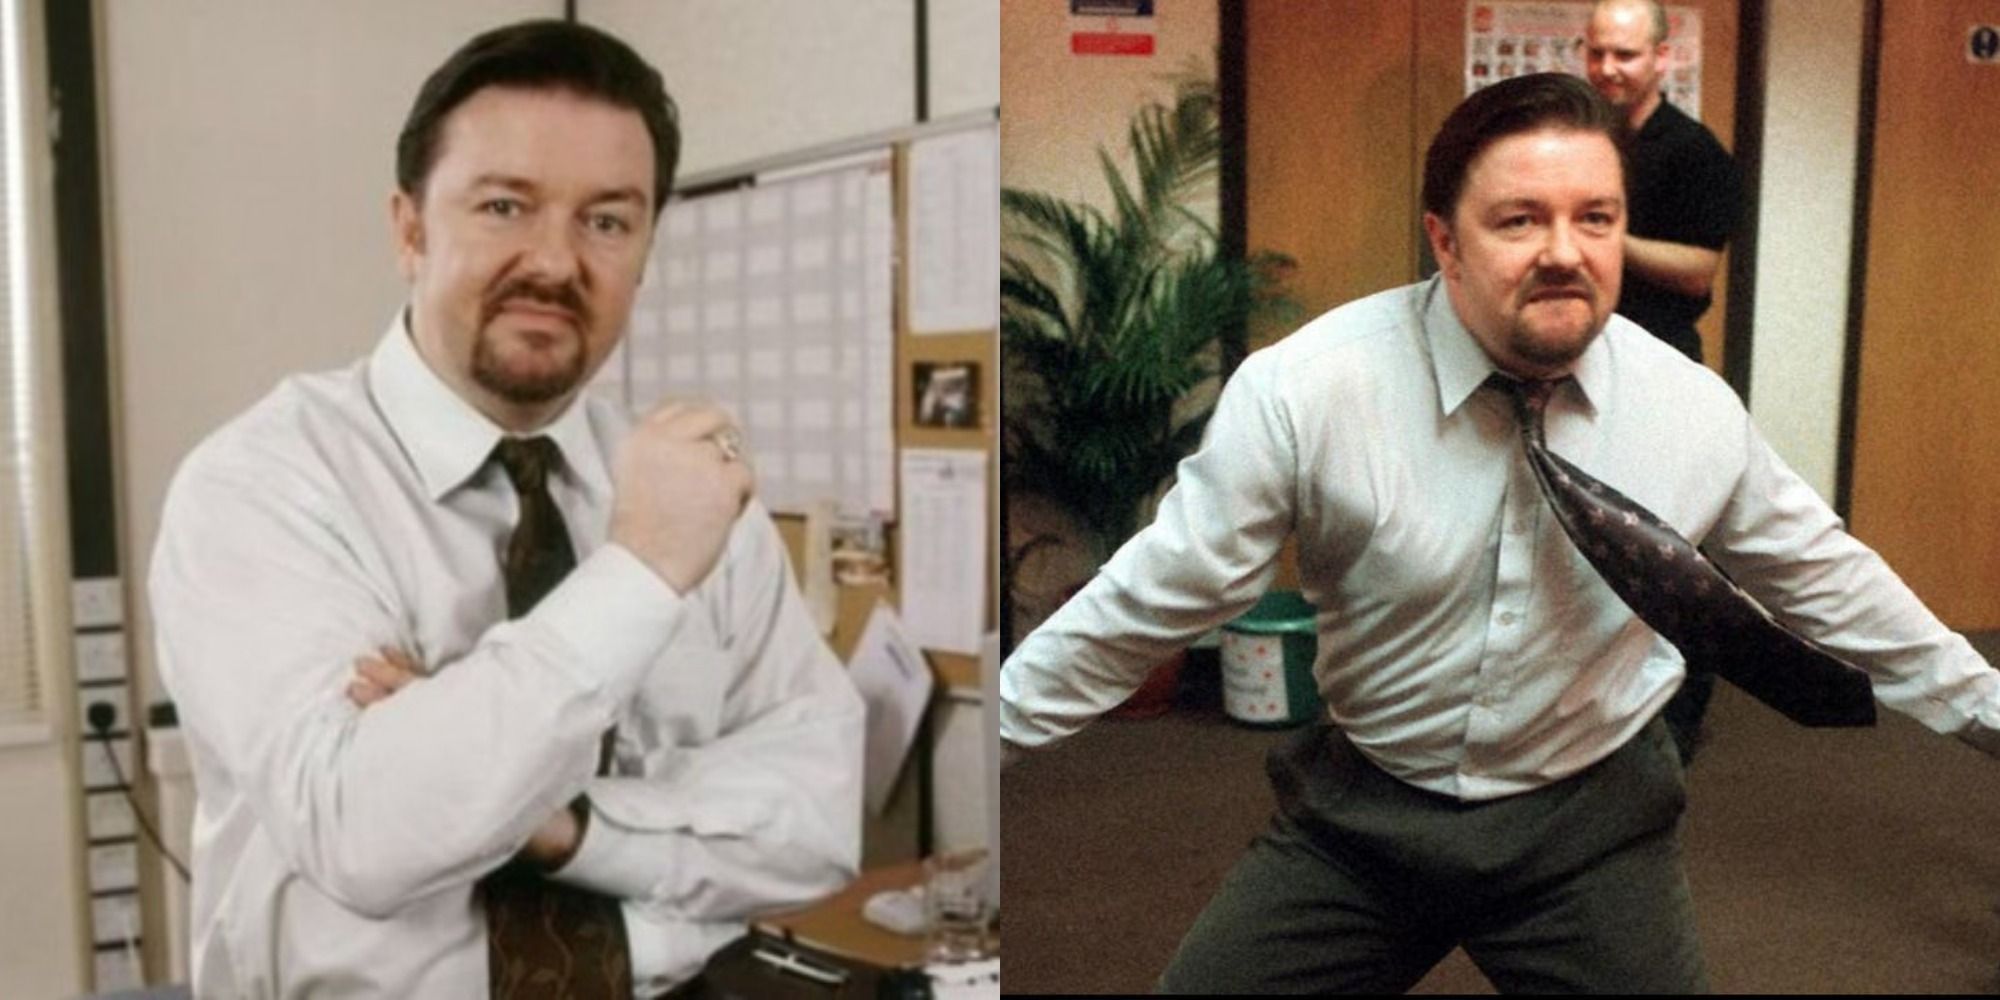 The Office UK: 10 Times David Brent Was Cringe But Hilarious